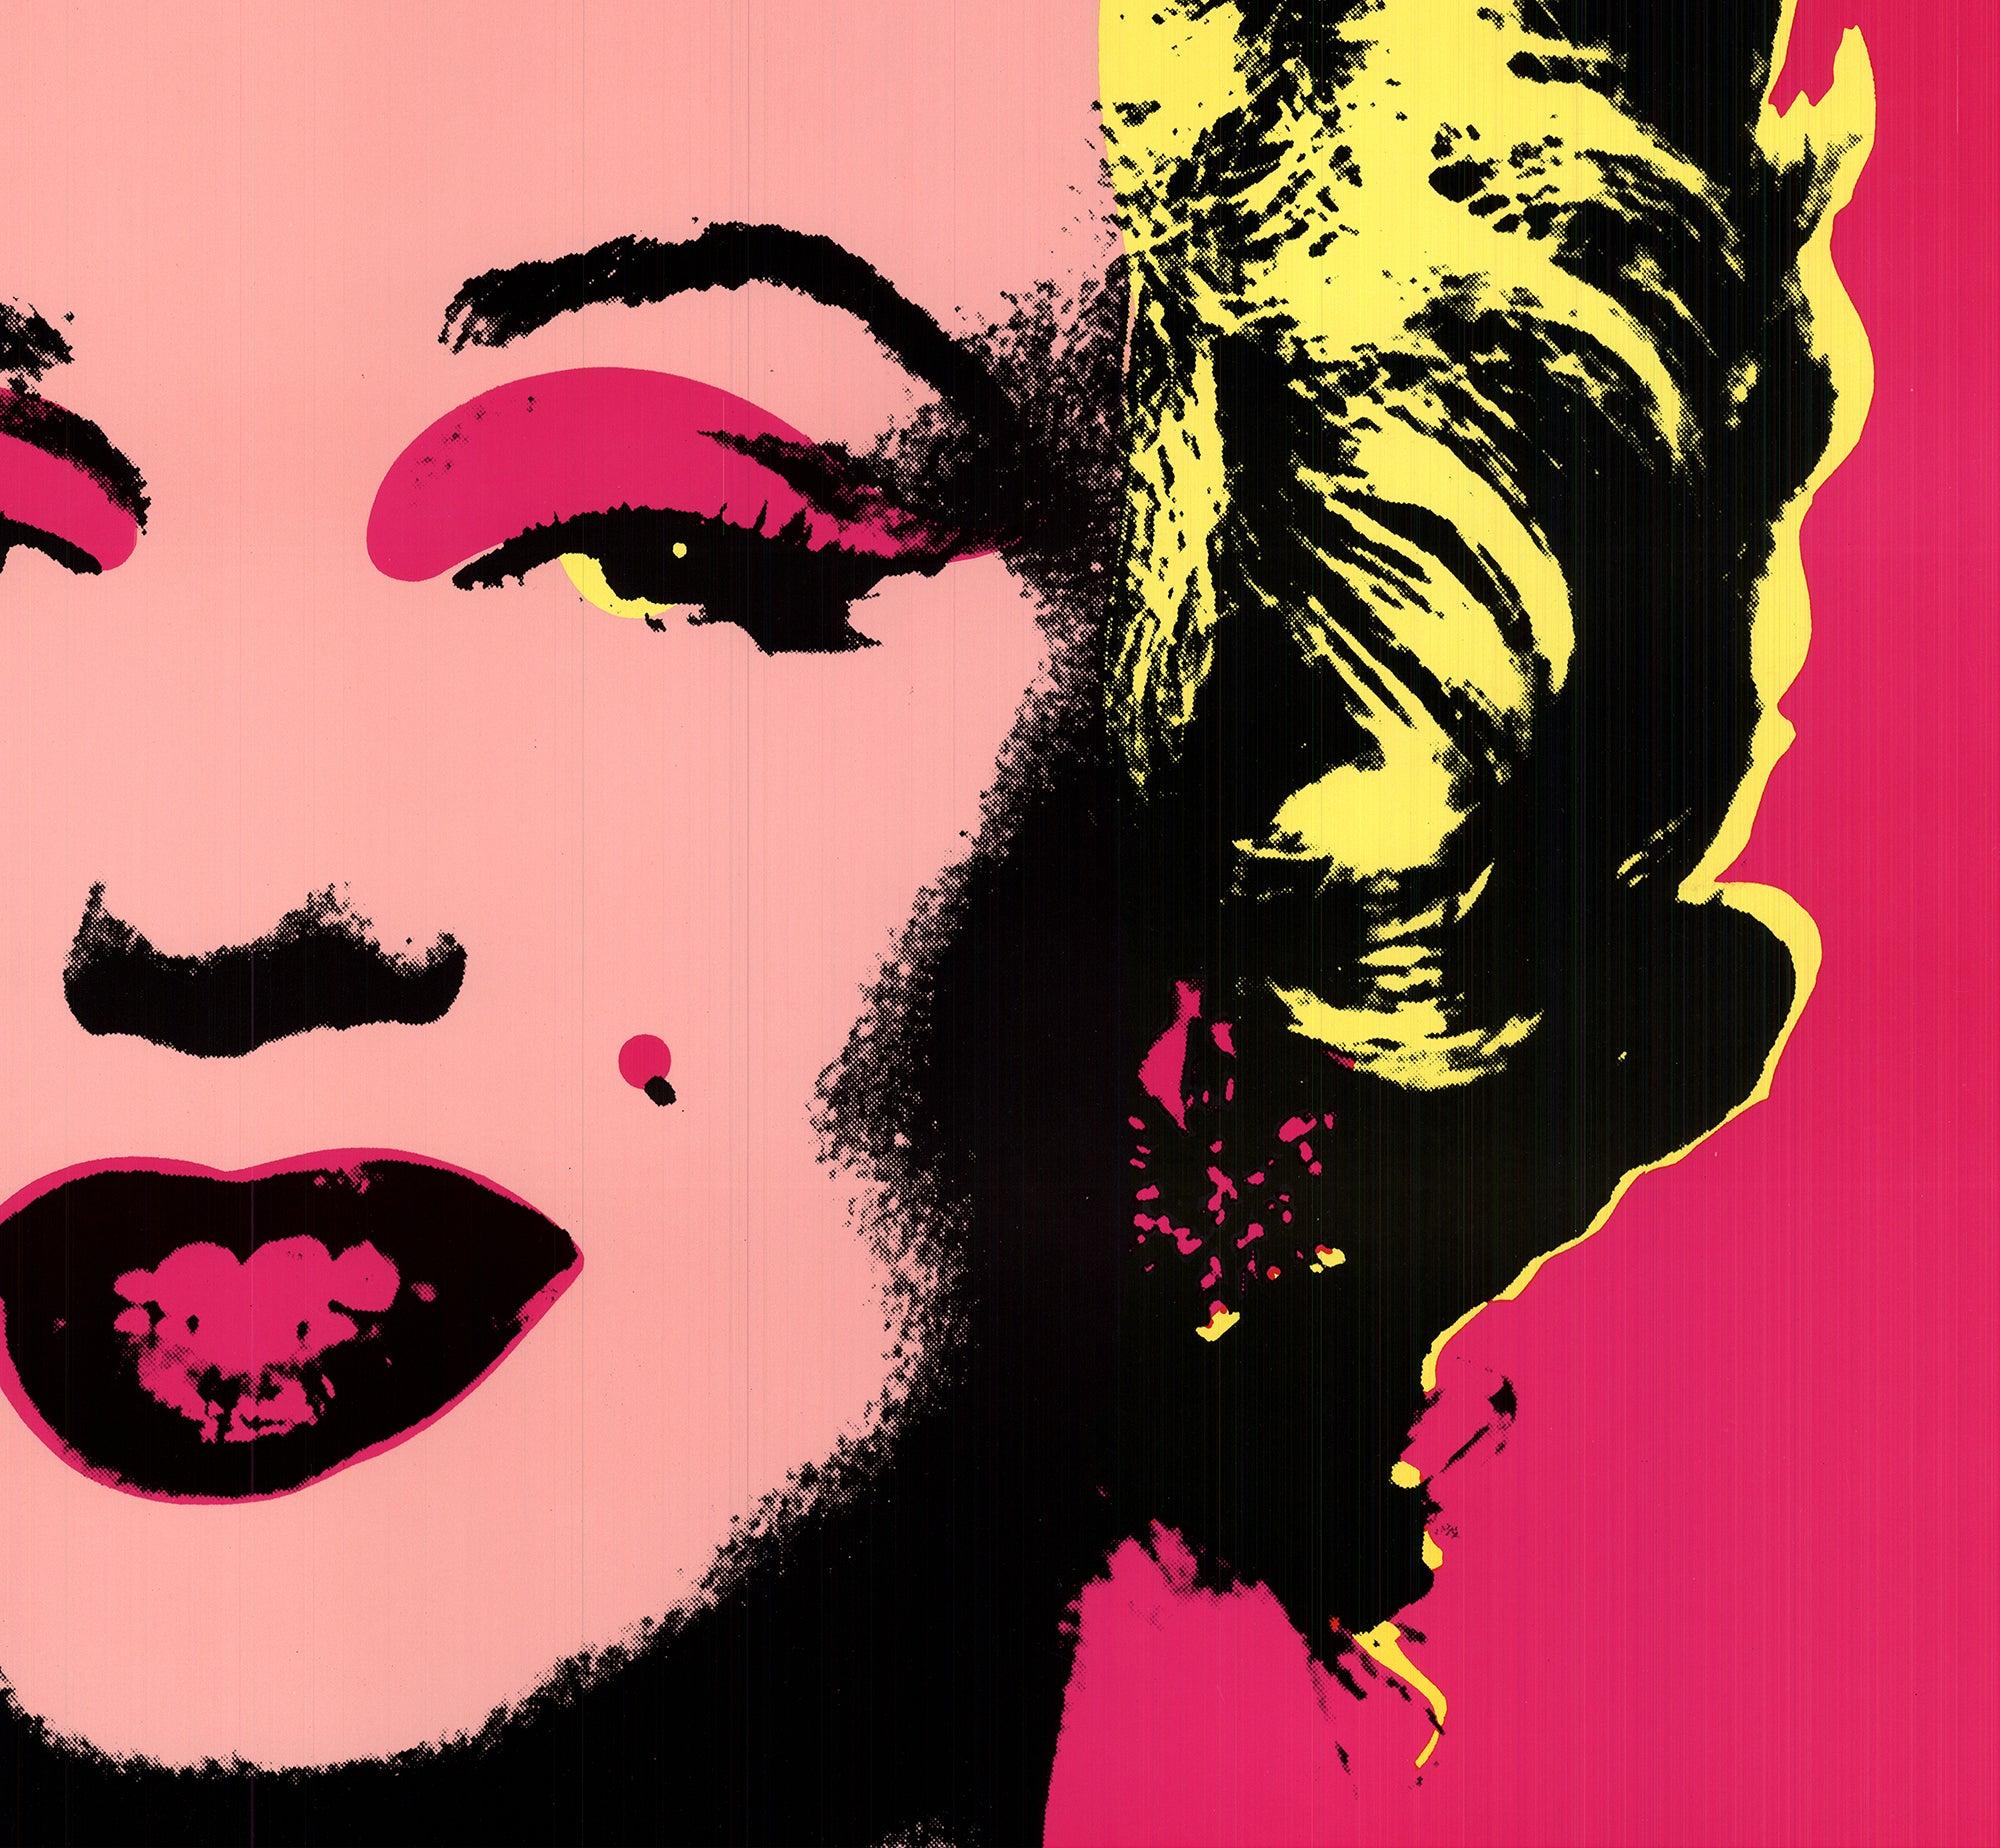 Andy Warhol « Marilyn Pink » 1987- Lithographie offset en vente 3